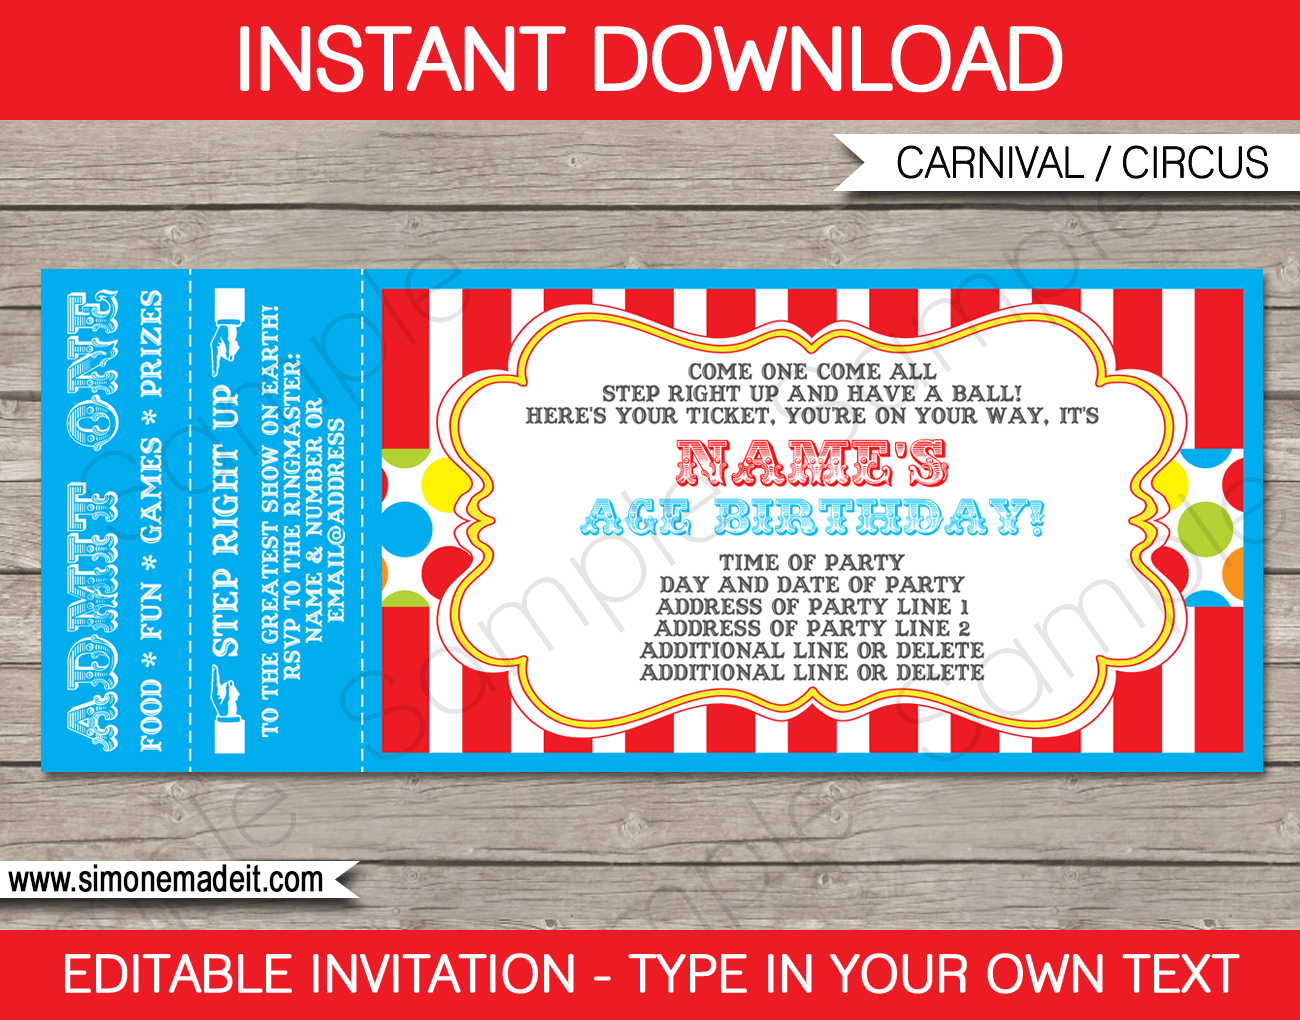 Carnival Party Ticket Invitation Template | Carnival Or Circus - Free Printable Ticket Invitations